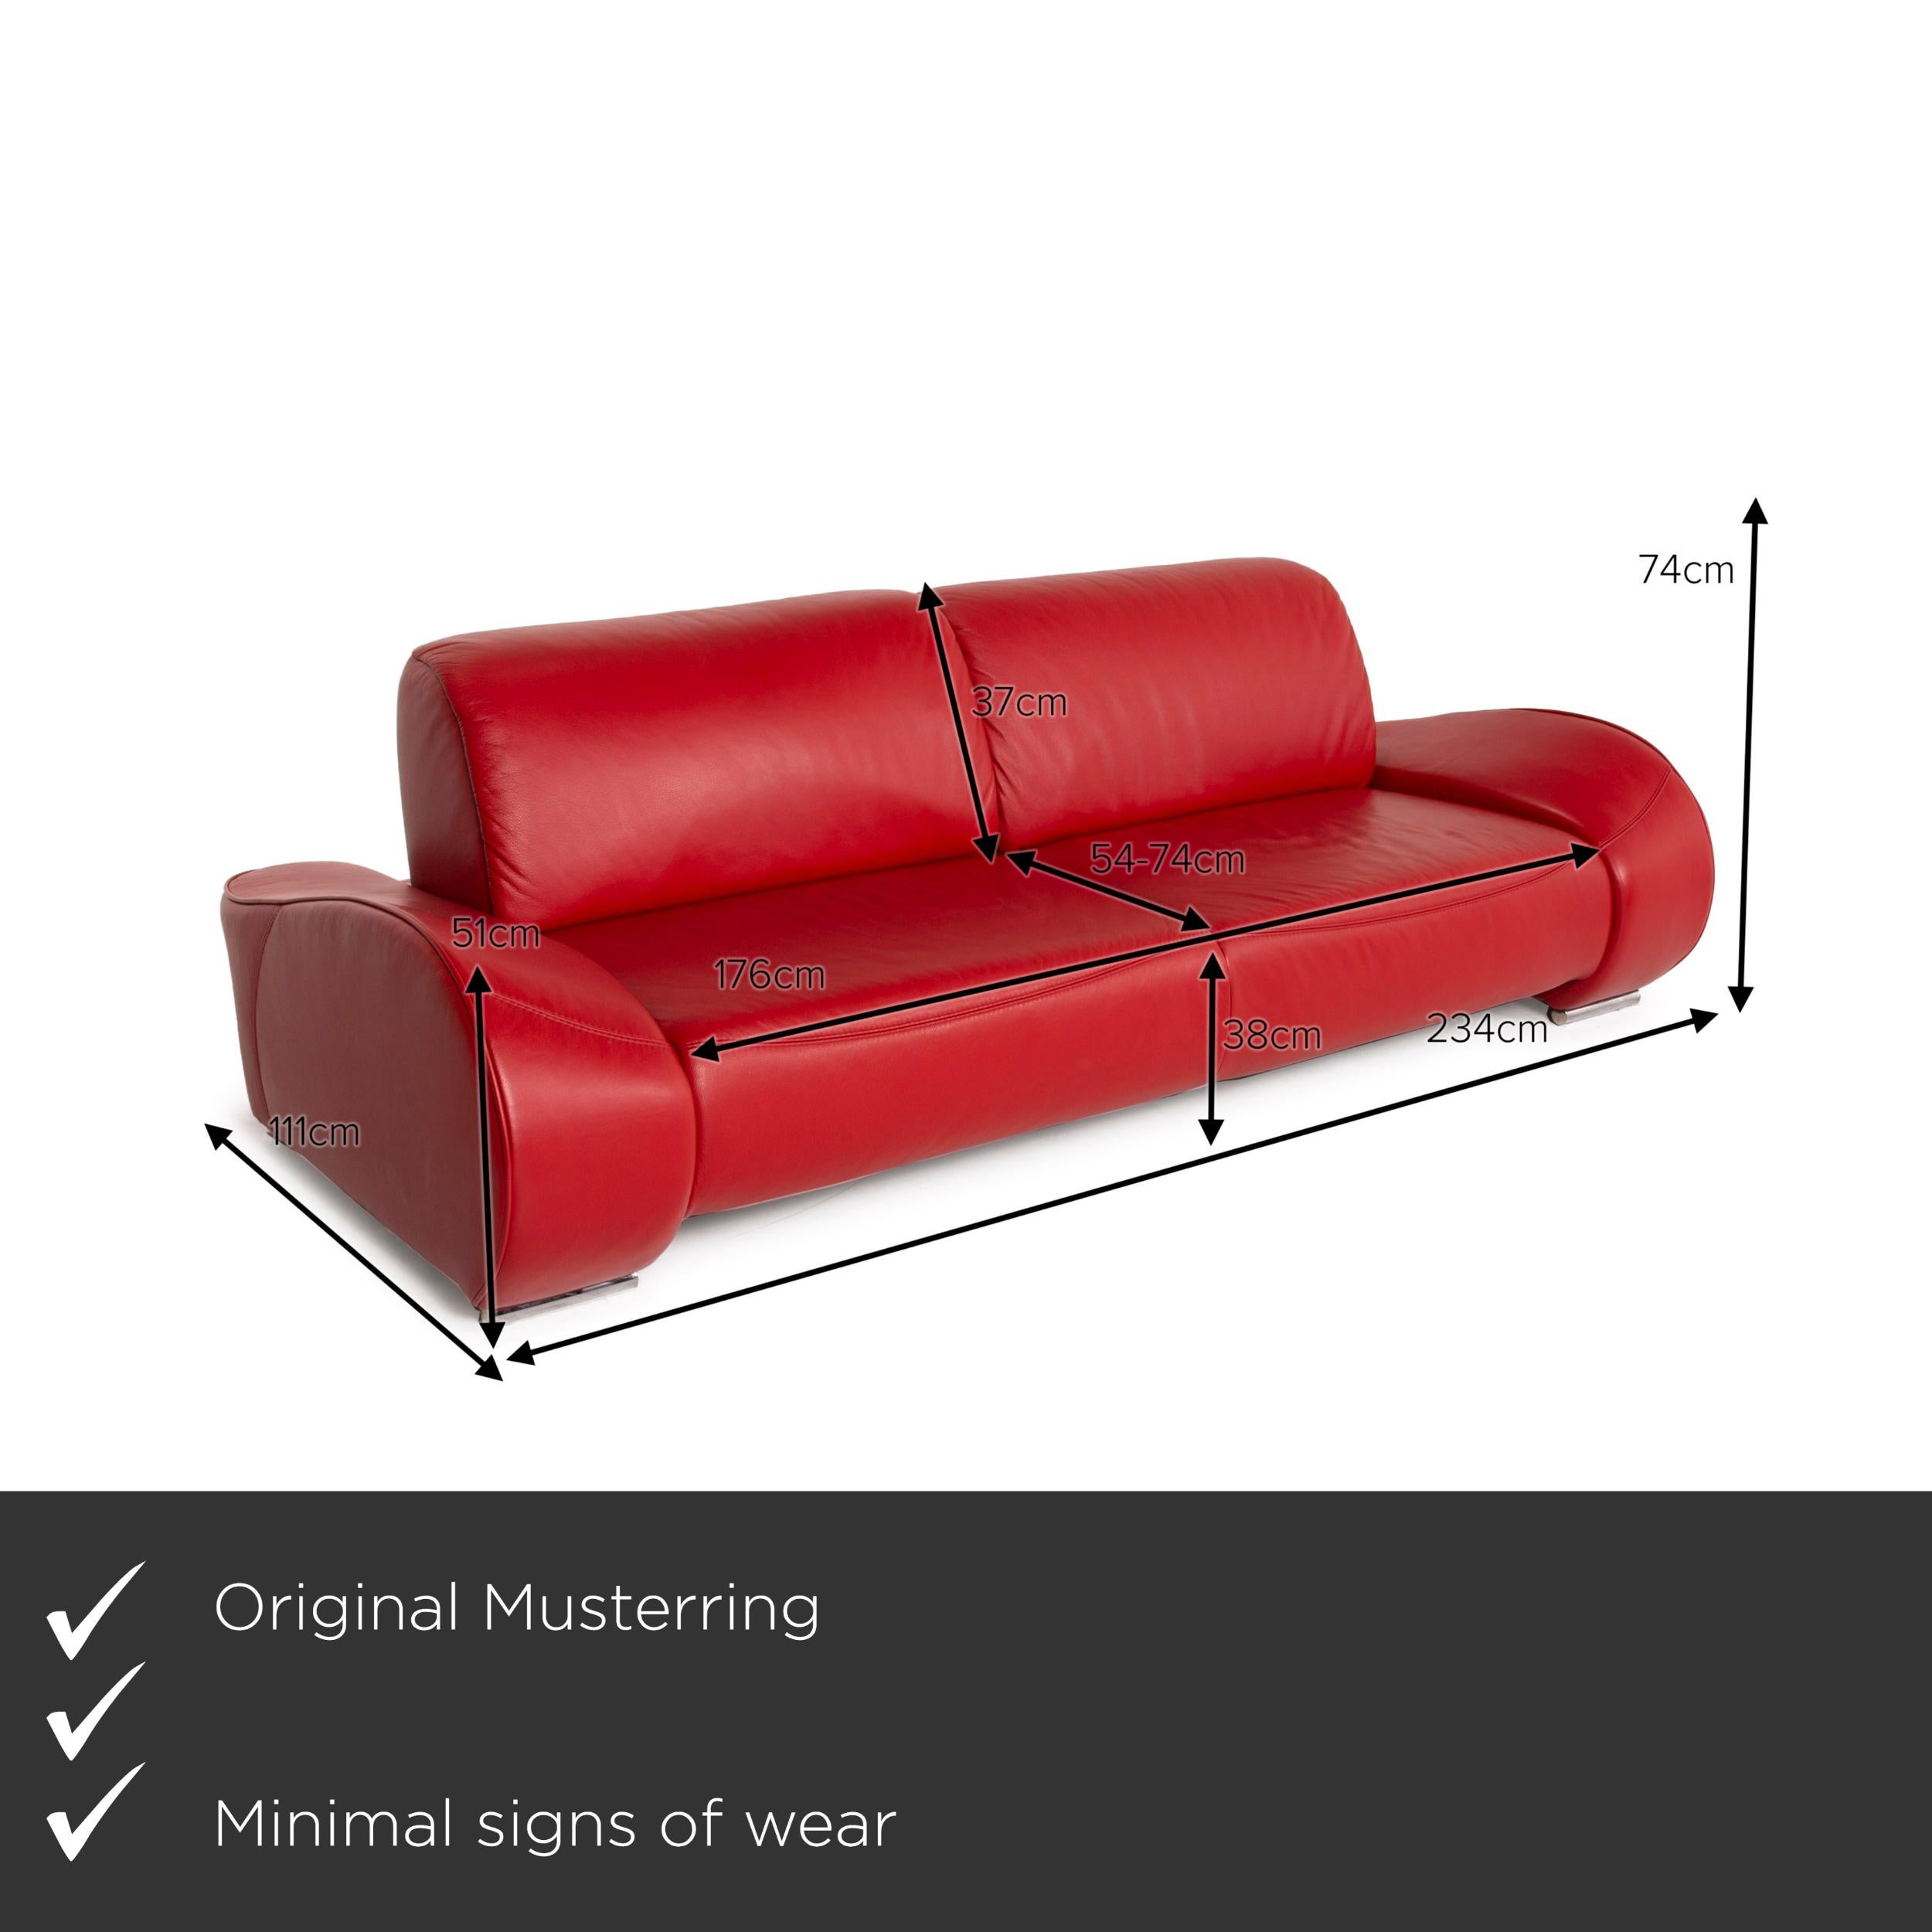 We present to you a Musterring MR-740 leather sofa red three-seater function.

Product measurements in centimeters:

Depth 111
Width 234
Height 74
Seat height 38
Rest height 51
Seat depth 54
Seat width 176
Back height 37.
  

     